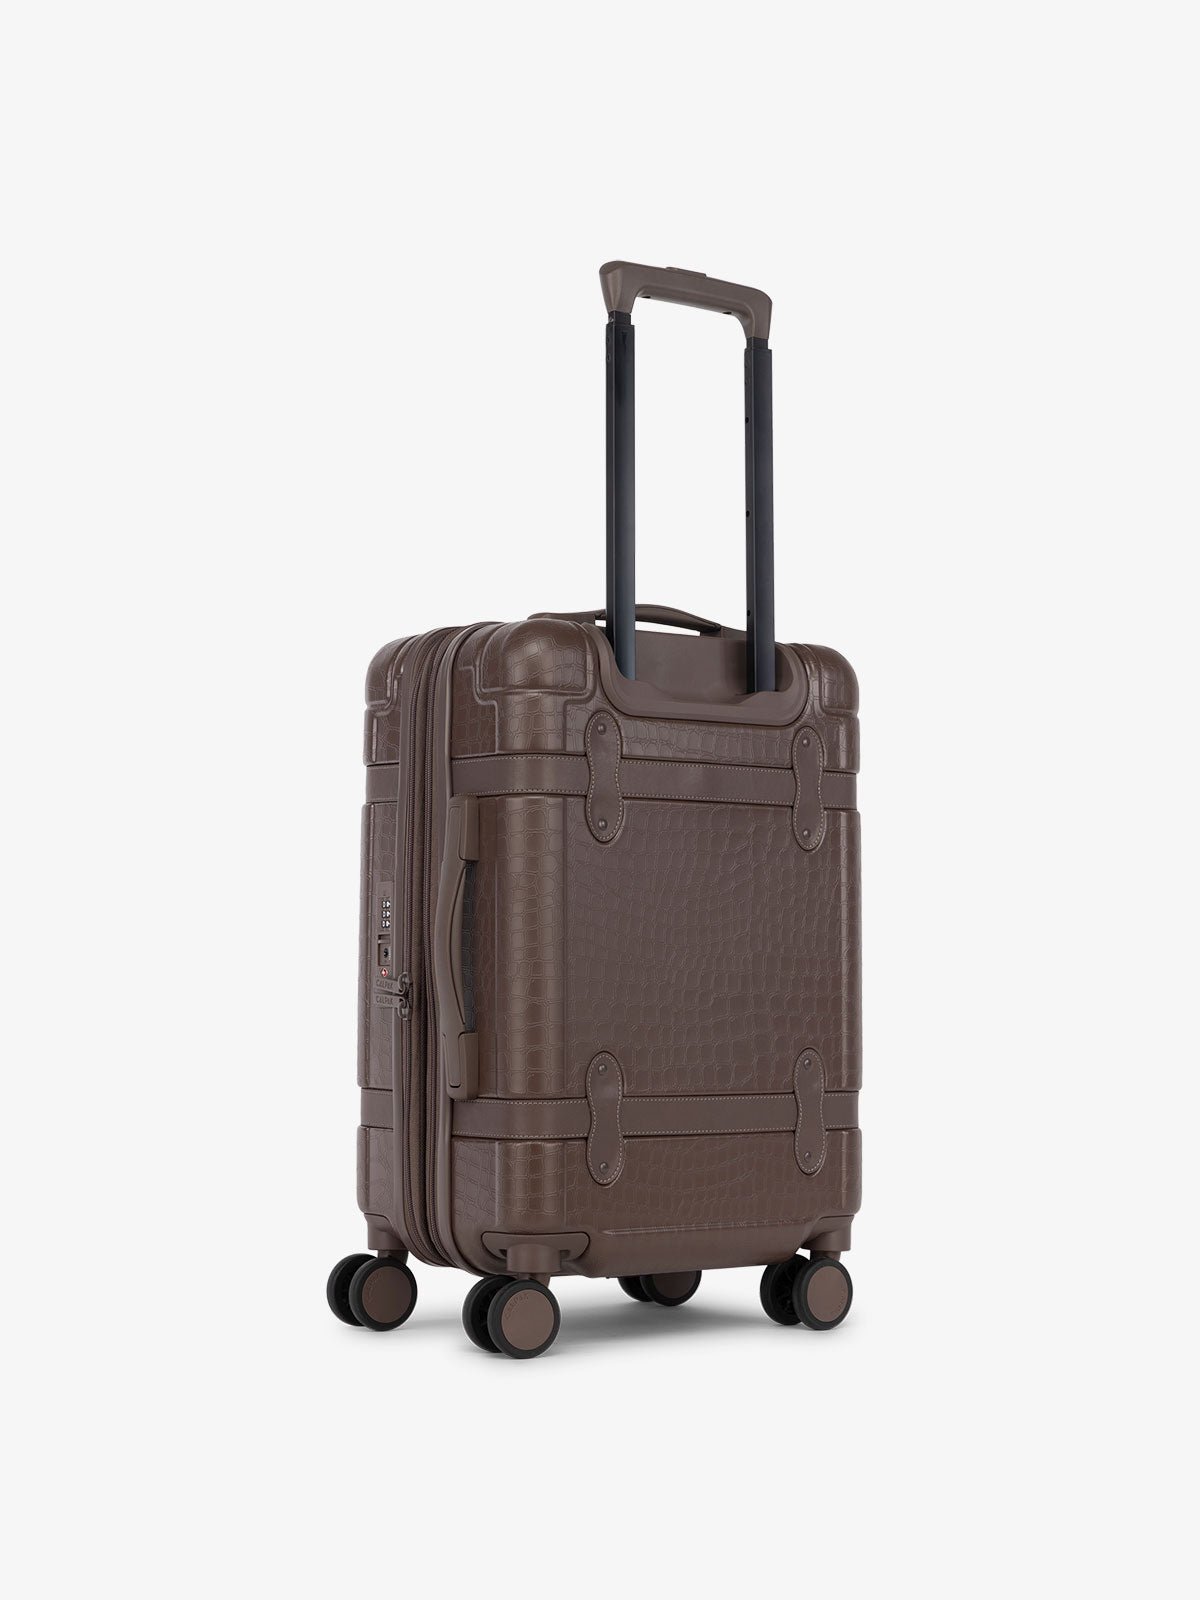 CALPAK TRNK carry on suitcase with hardshell exterior, tsa lock and top and side handles in espresso